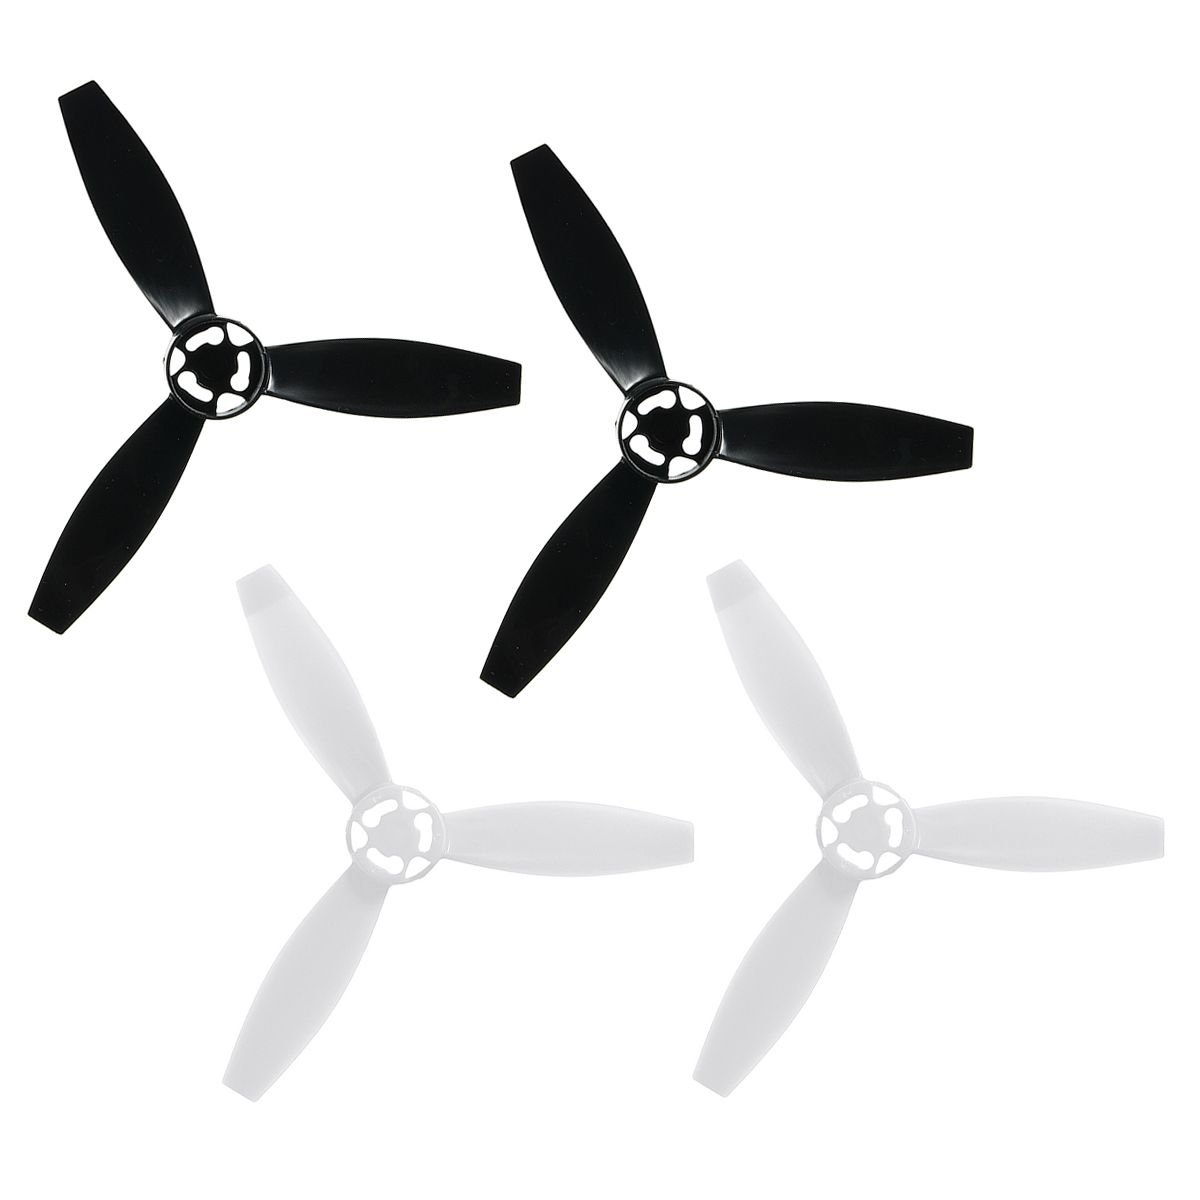 4Pcs-Propellers-Props-Replacement-Accessories-Blades-For-Parrot-Bebop-2-Drone-1429030